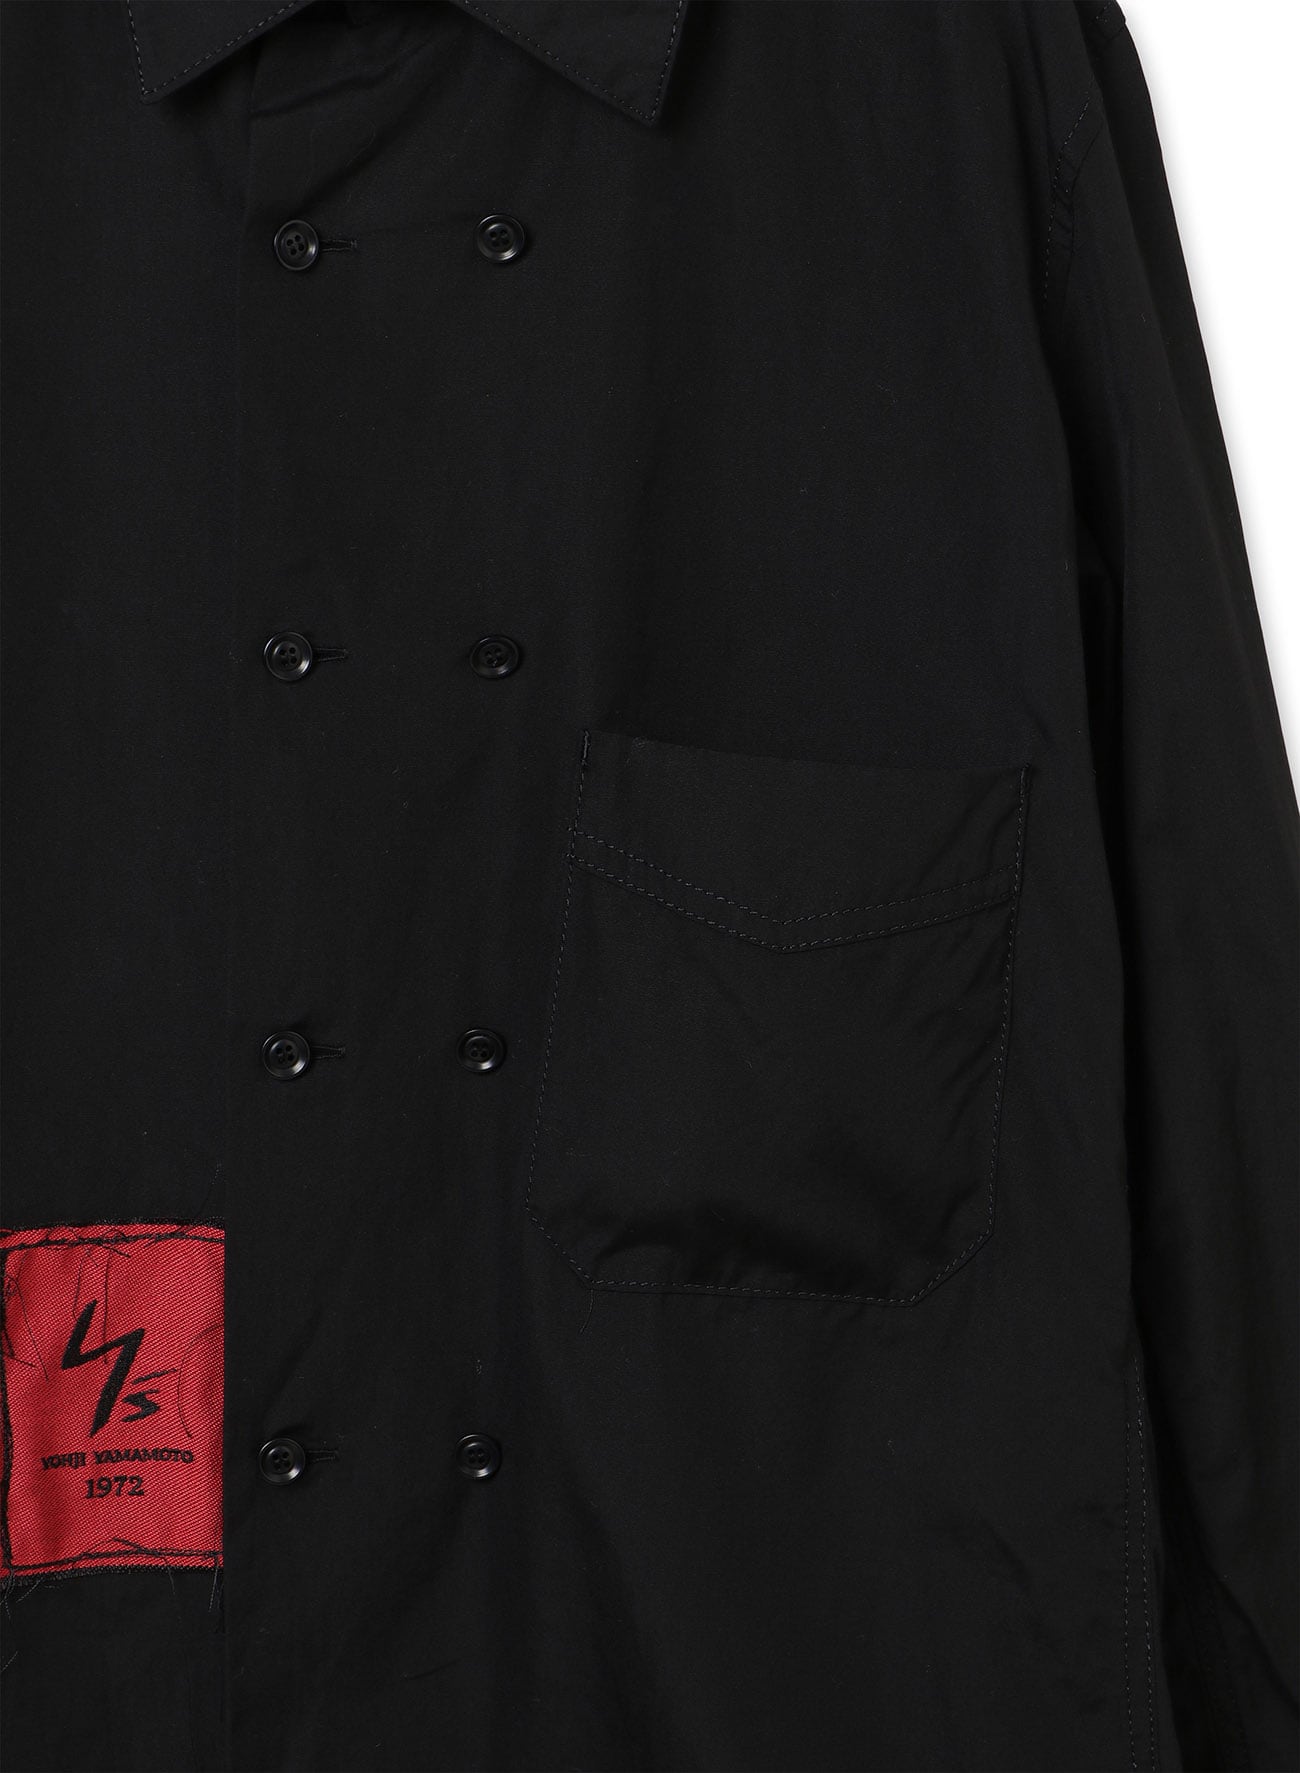 [Y's1972] LOGO PATCH BROAD FRONT DOUBLE SHIRT